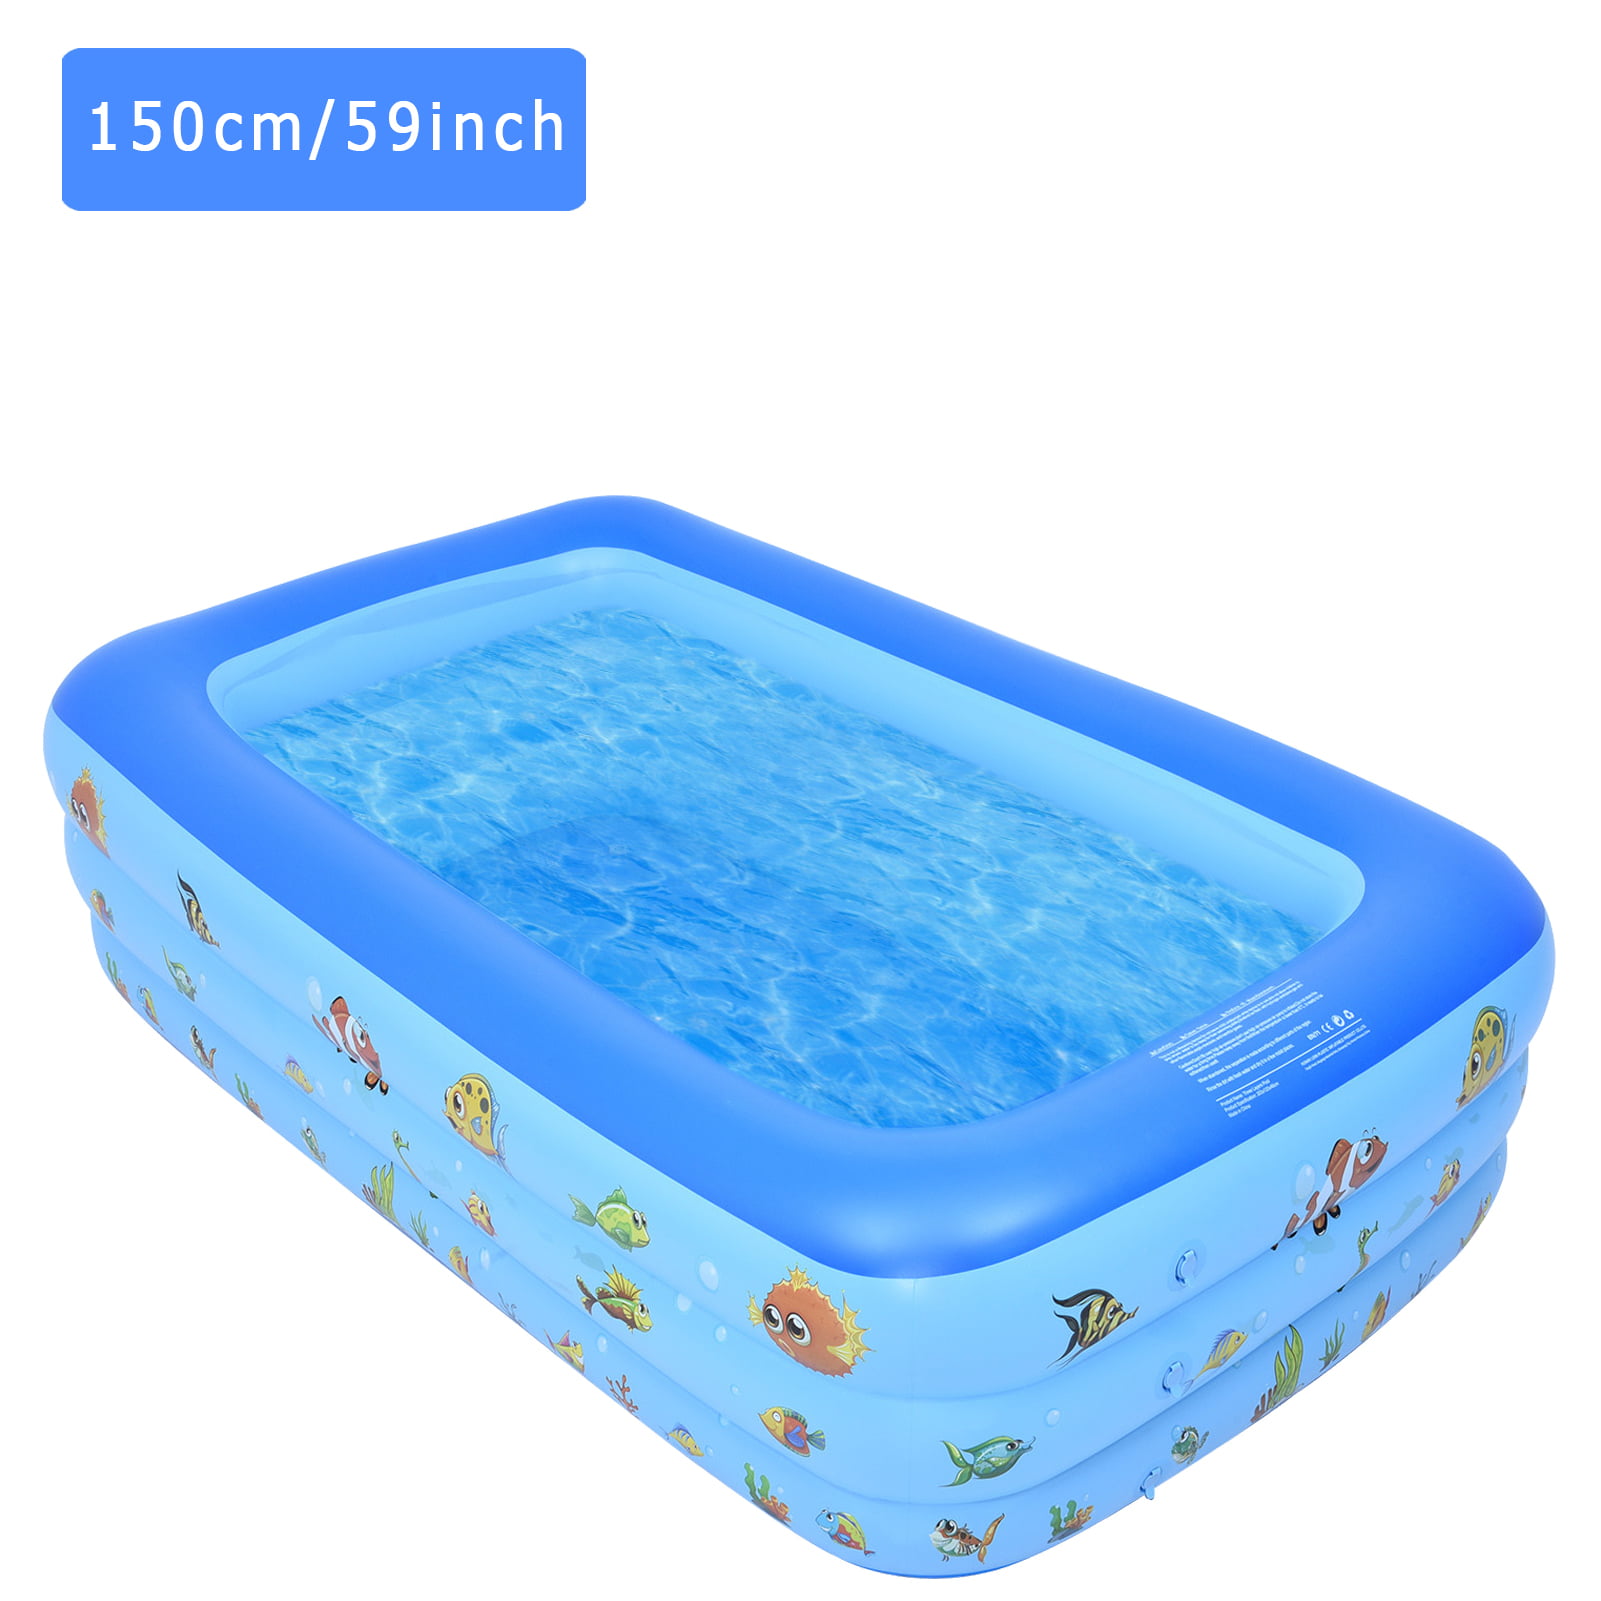 show original title Details about   Child inflatable swimming pool baby bath sun family paddling pool s/m/l 